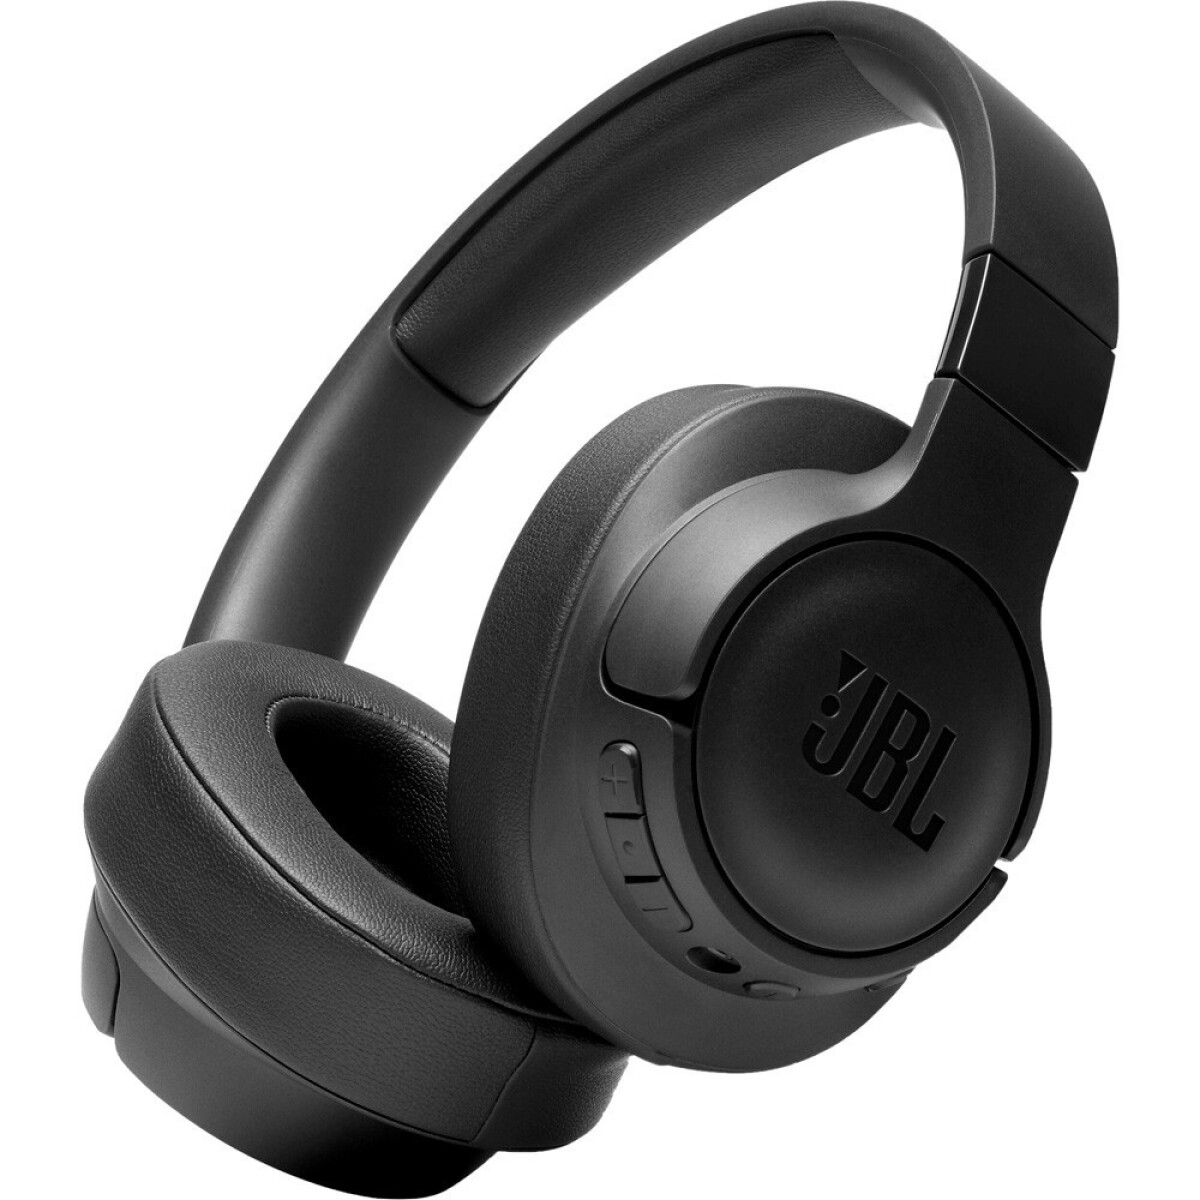 Auricular inalambrico bluetooth jbl t760 noise cancelling Negro